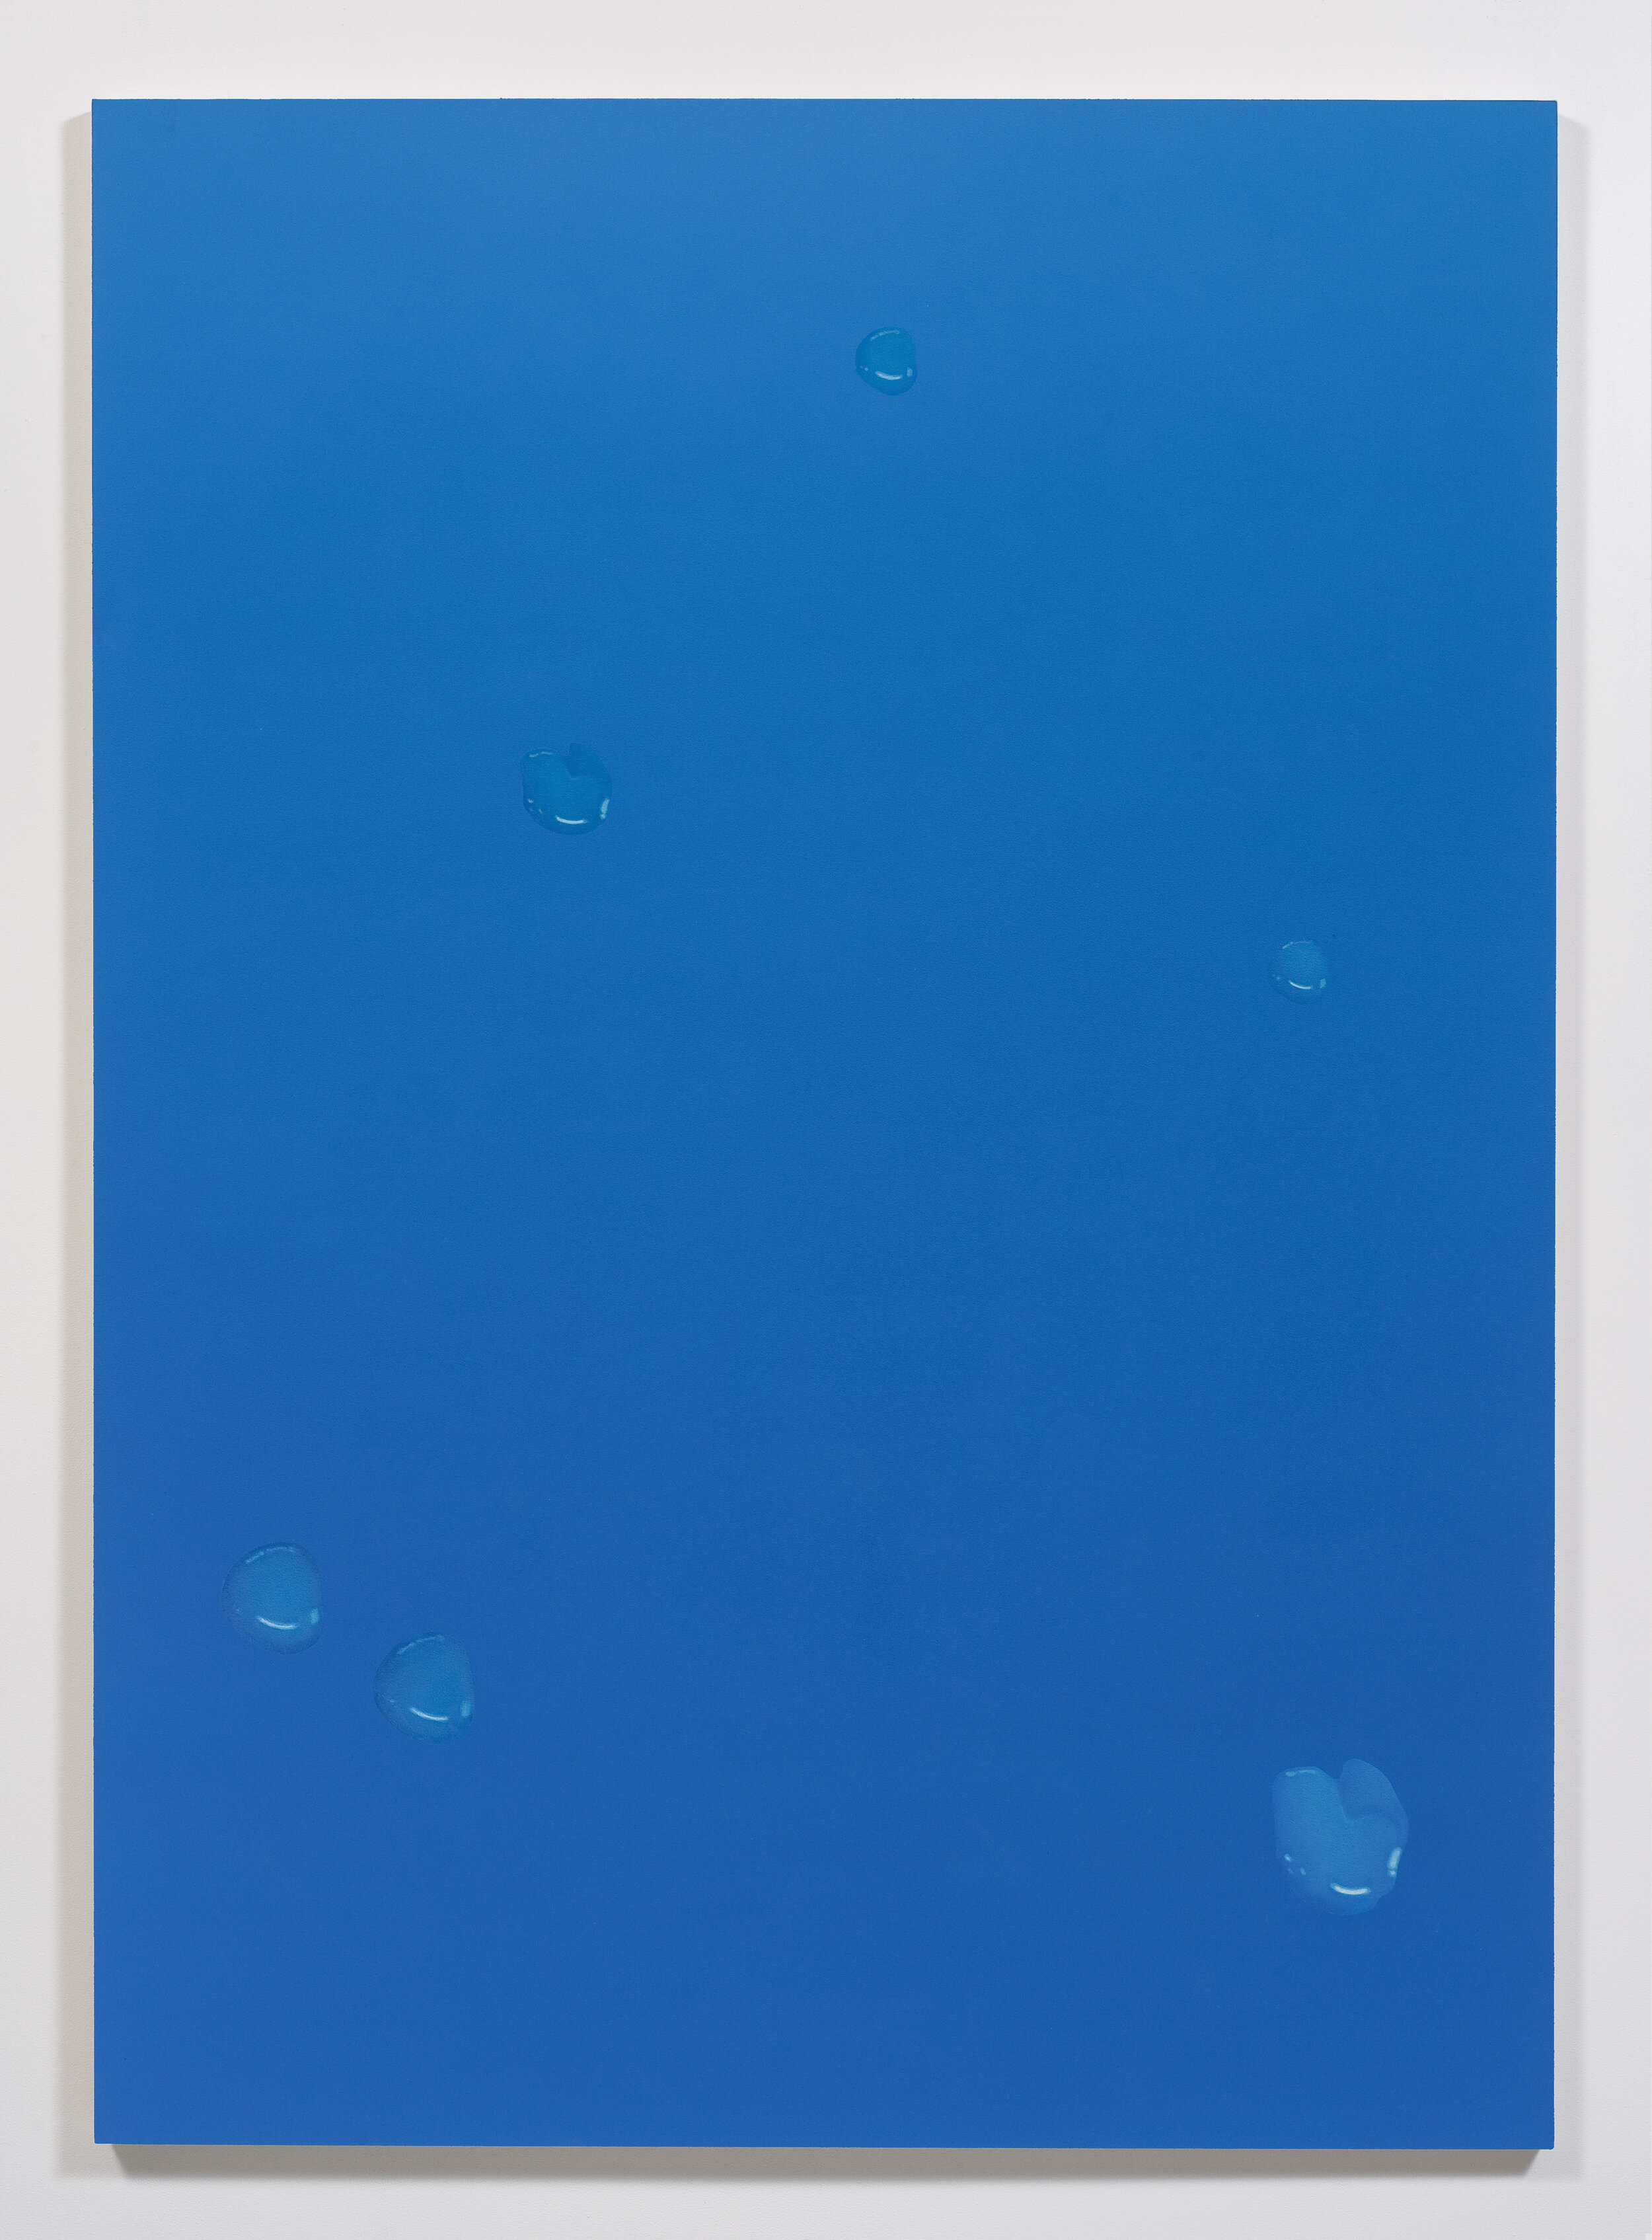   Untitled Painting in Cerulean over Ultramarine with Trompe l'Oeil,  2014. Acrylic on canvas. 82 x 60 inches 